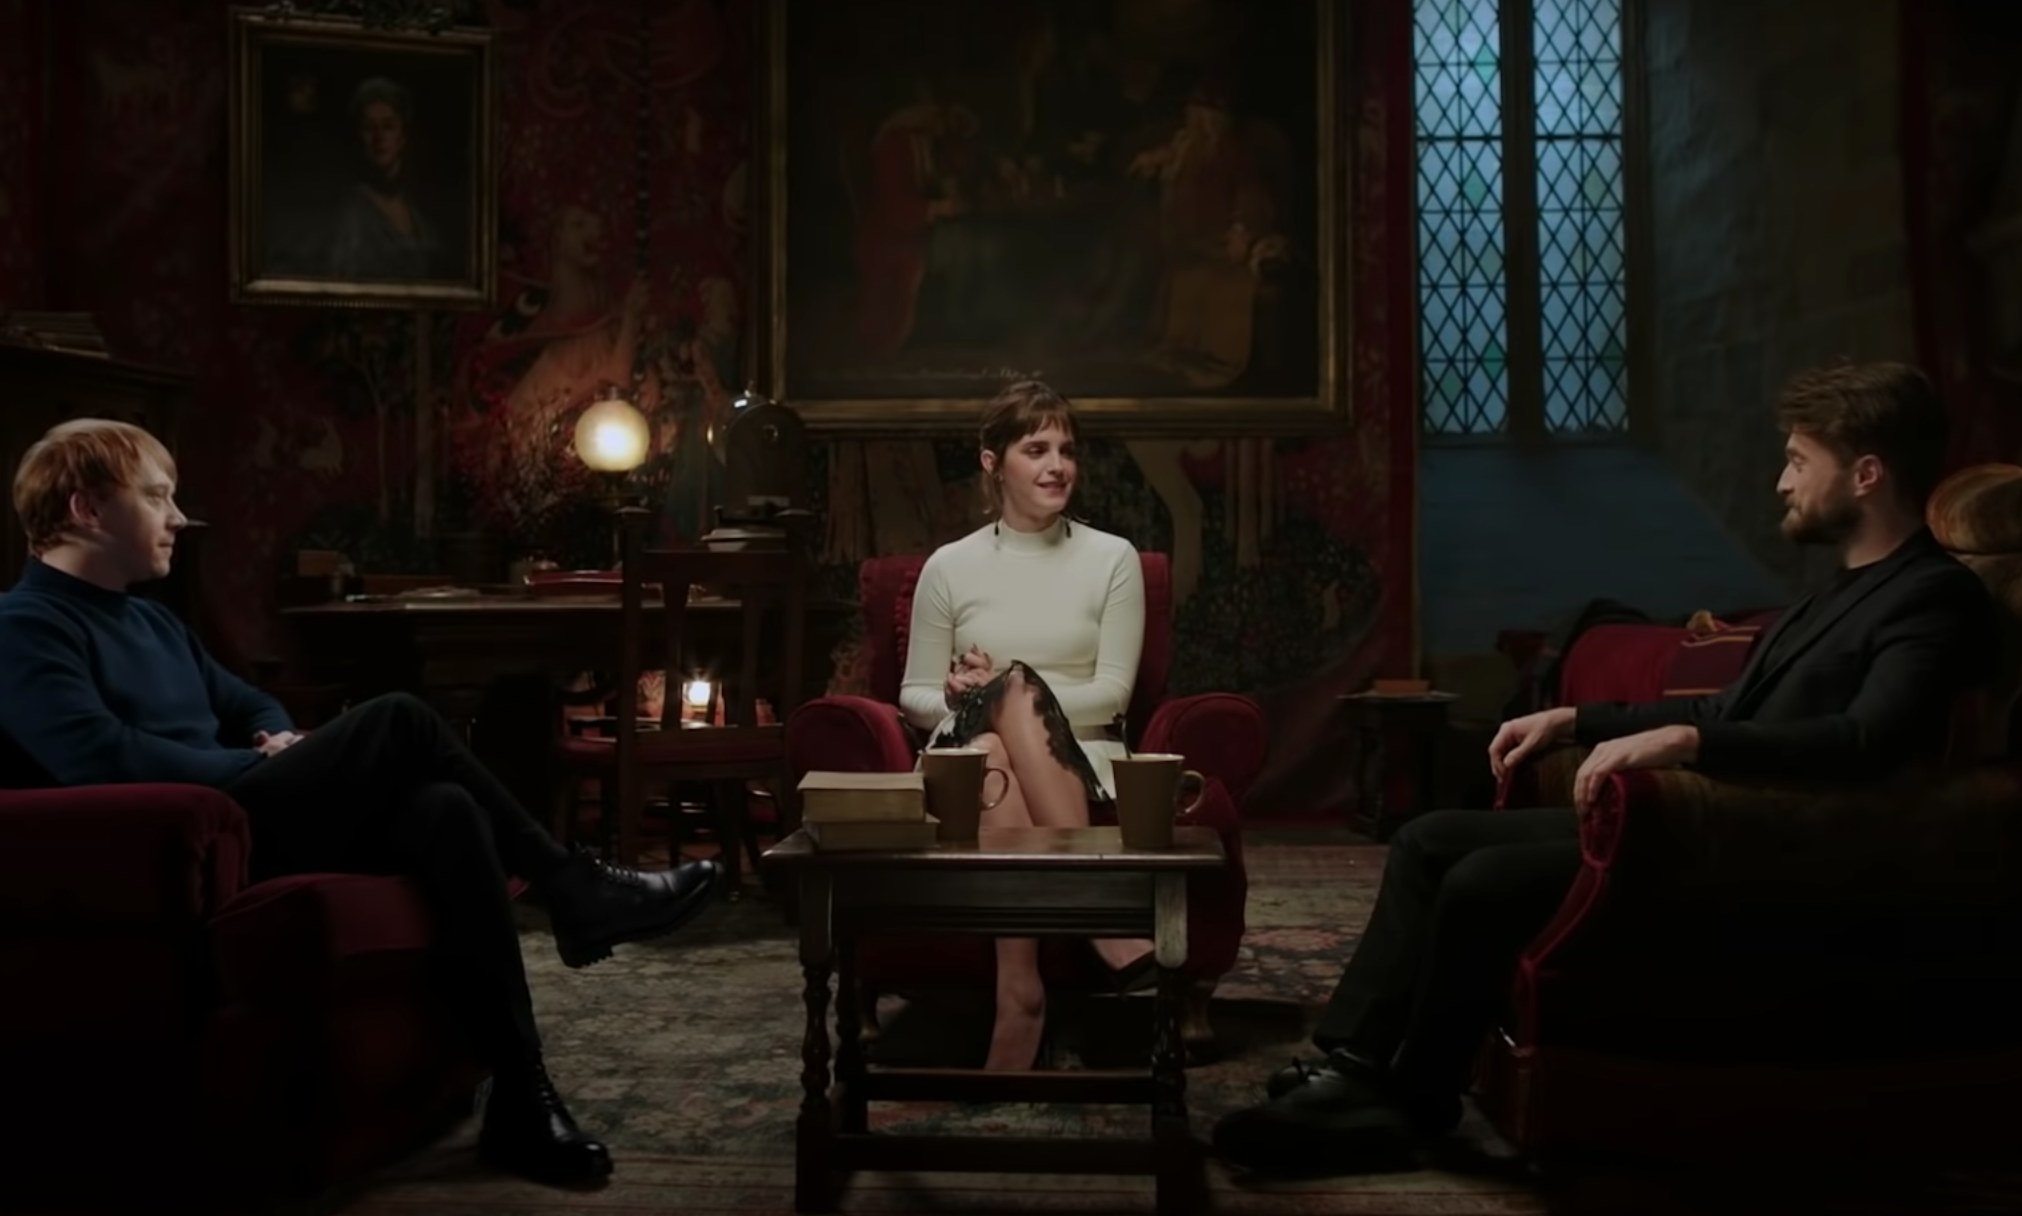 Rupert Grint, Emma Watson and Daniel Radcliffe sitting together in a still from Harry Potter 20th Anniversary: Return to Hogwarts